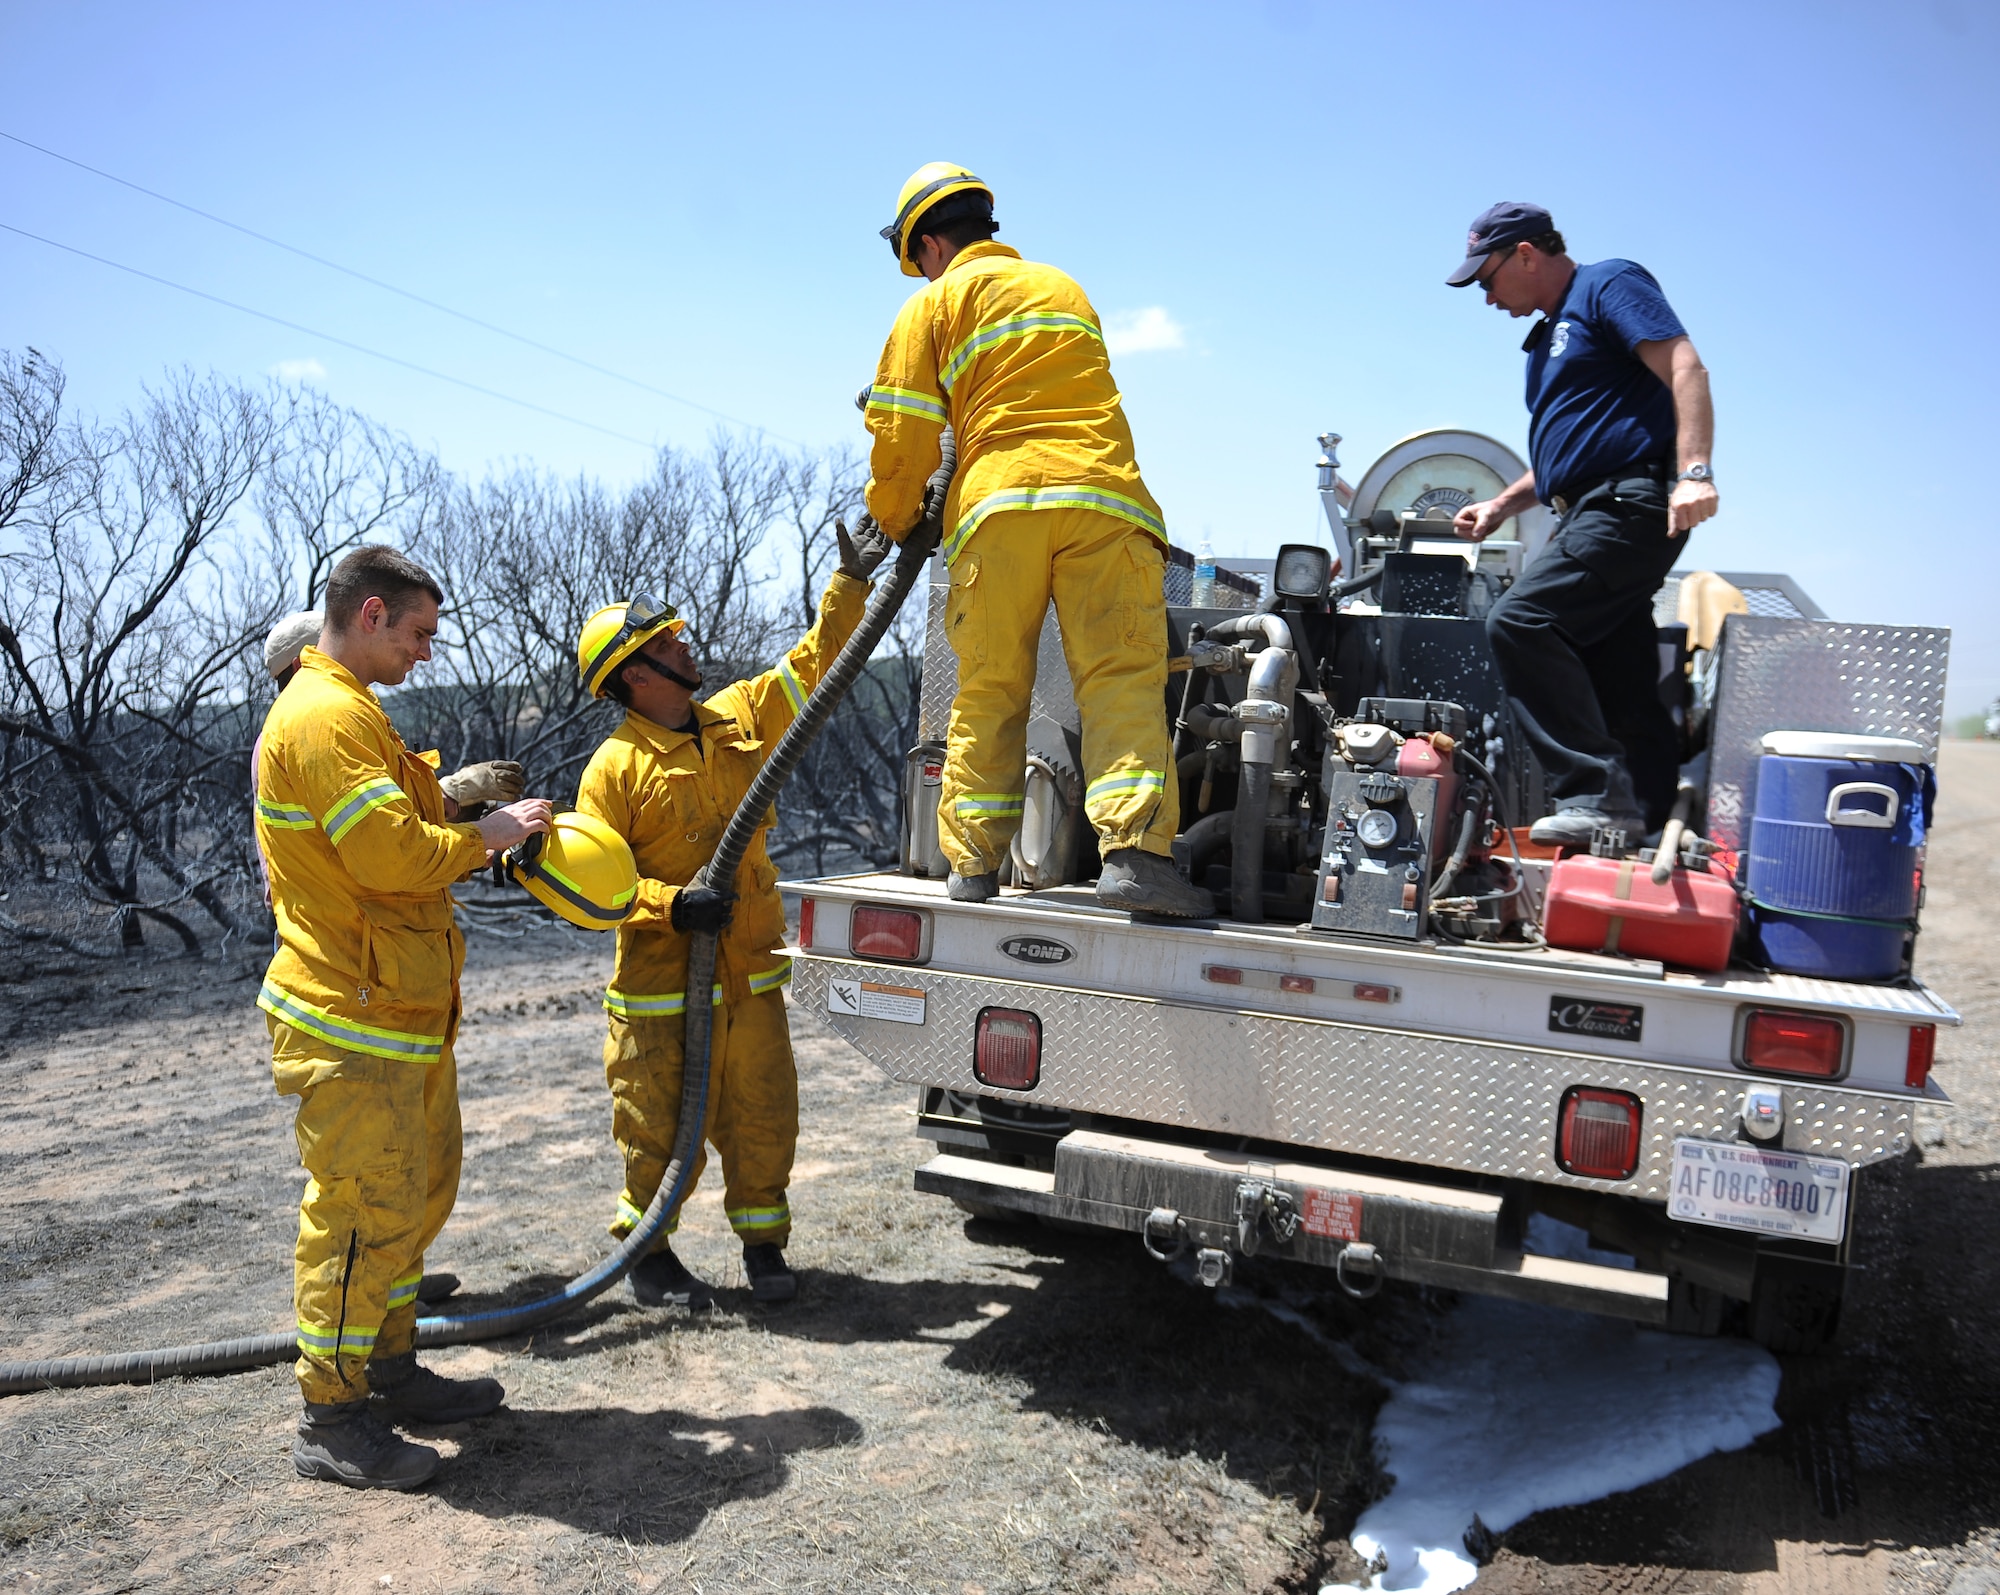 Dyess Air Force Base firefighters re-service a brush truck April 28, 2014, at Camp Barkeley near Buffalo Gap, Texas. Brush trucks are used by the firefighters to quickly attack fires that require a more agile vehicle. Dyess fire crews teamed with other local agencies to extinguish a wildfire that spread across 1,600 acres. (U.S. Air Force photo by Airman 1st Class Kedesha Pennant/Released)